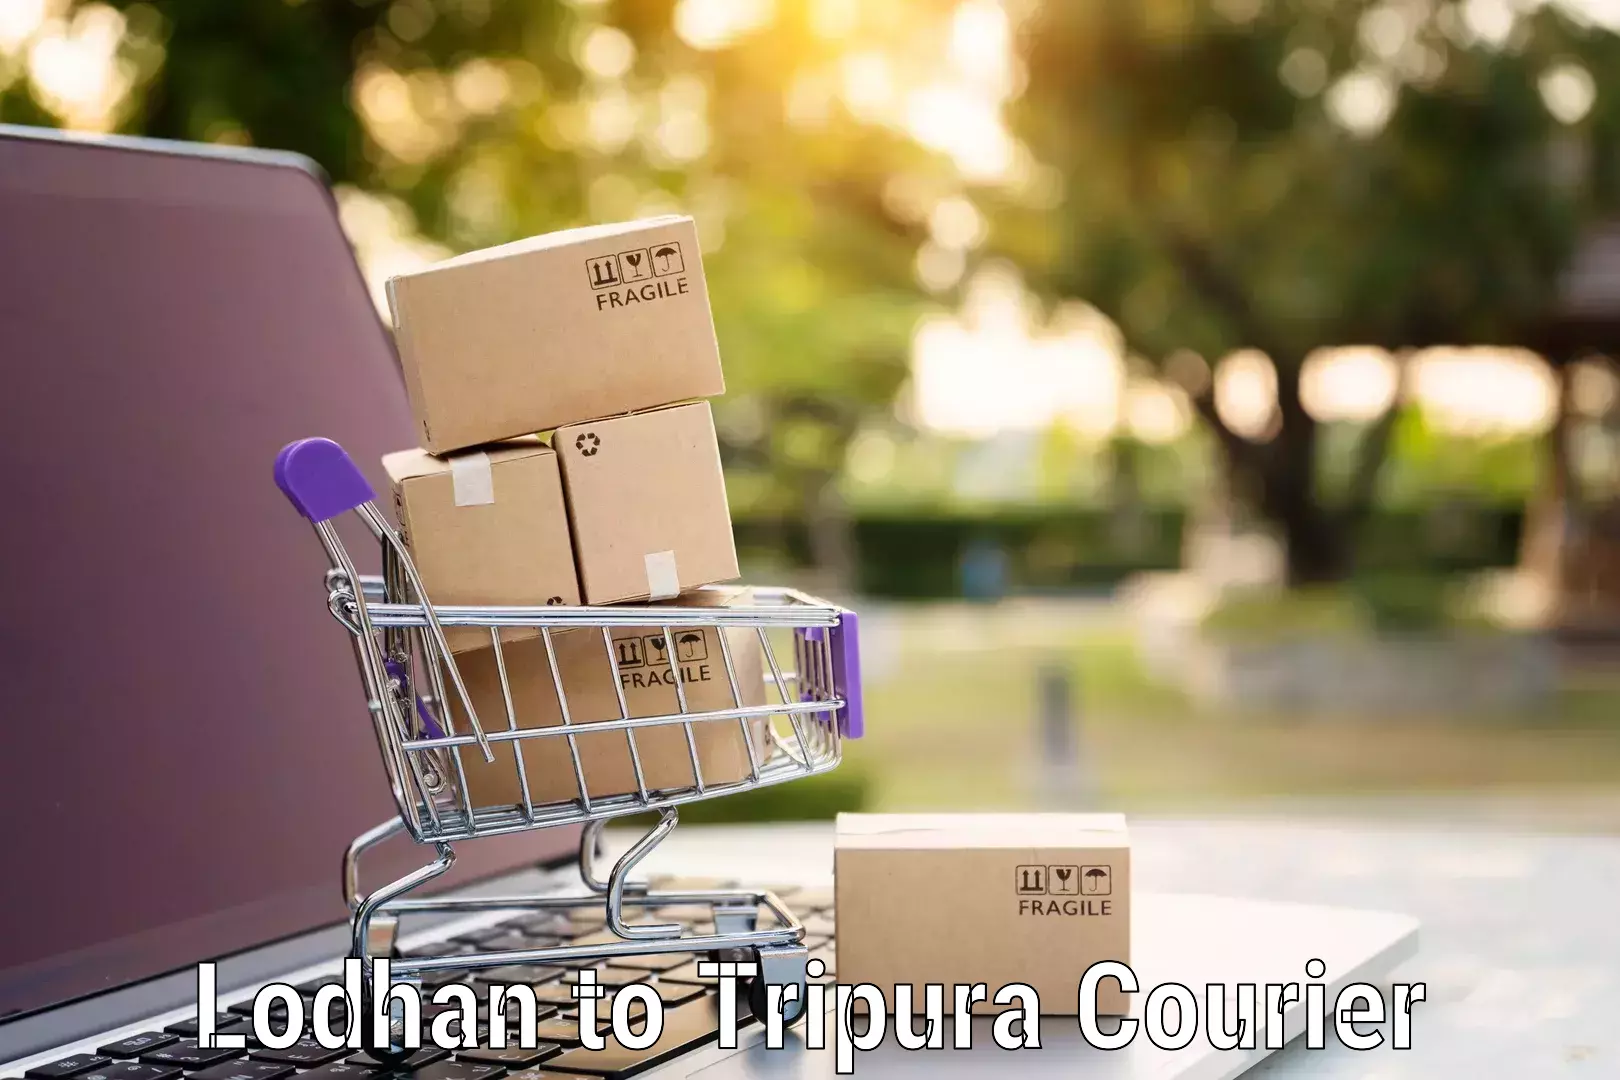 Furniture delivery service Lodhan to Tripura